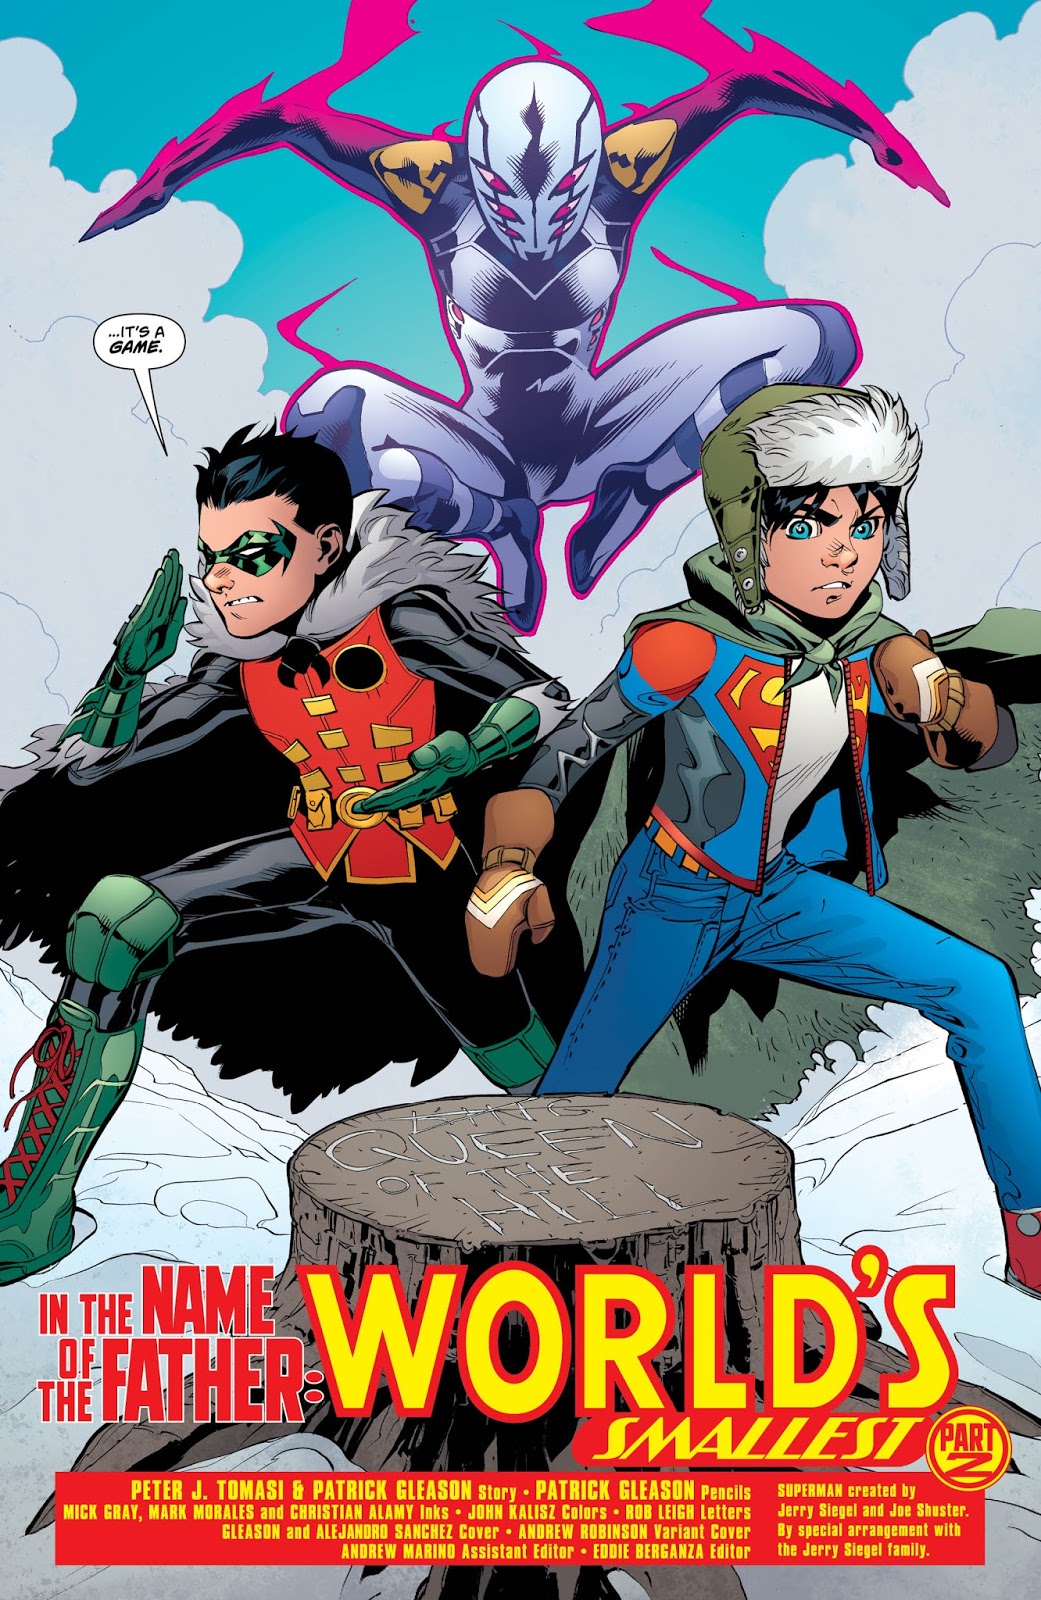 Weird Science DC Comics: Superman #11 Review and *SPOILERS*